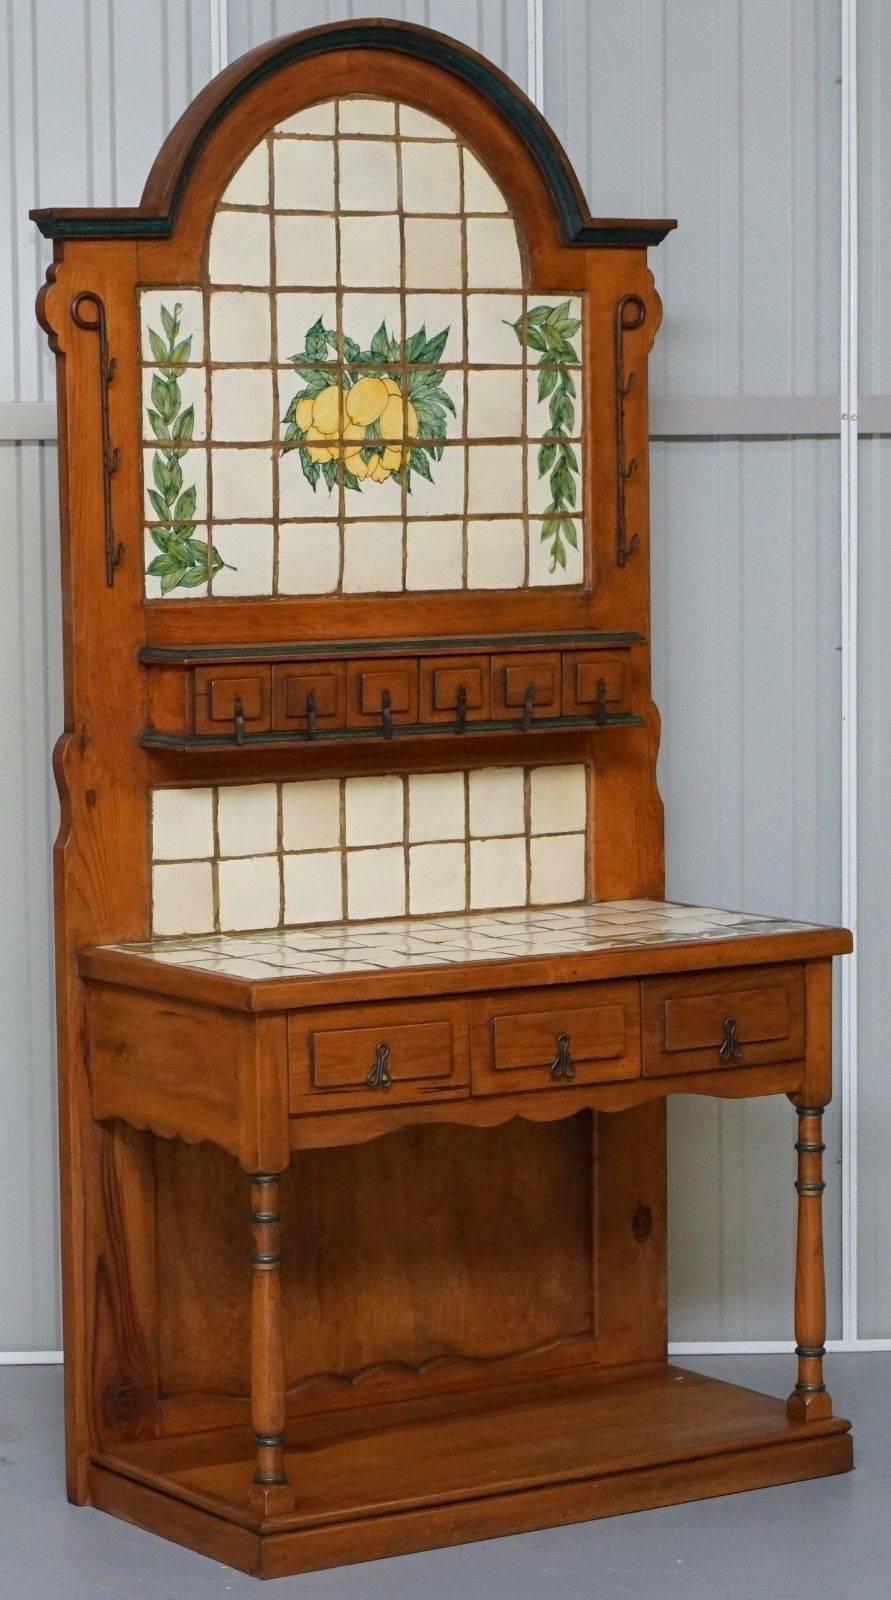 British Stunning Vintage Solid Oak Tiled Farmhouse Country Sideboard Rustic Charm